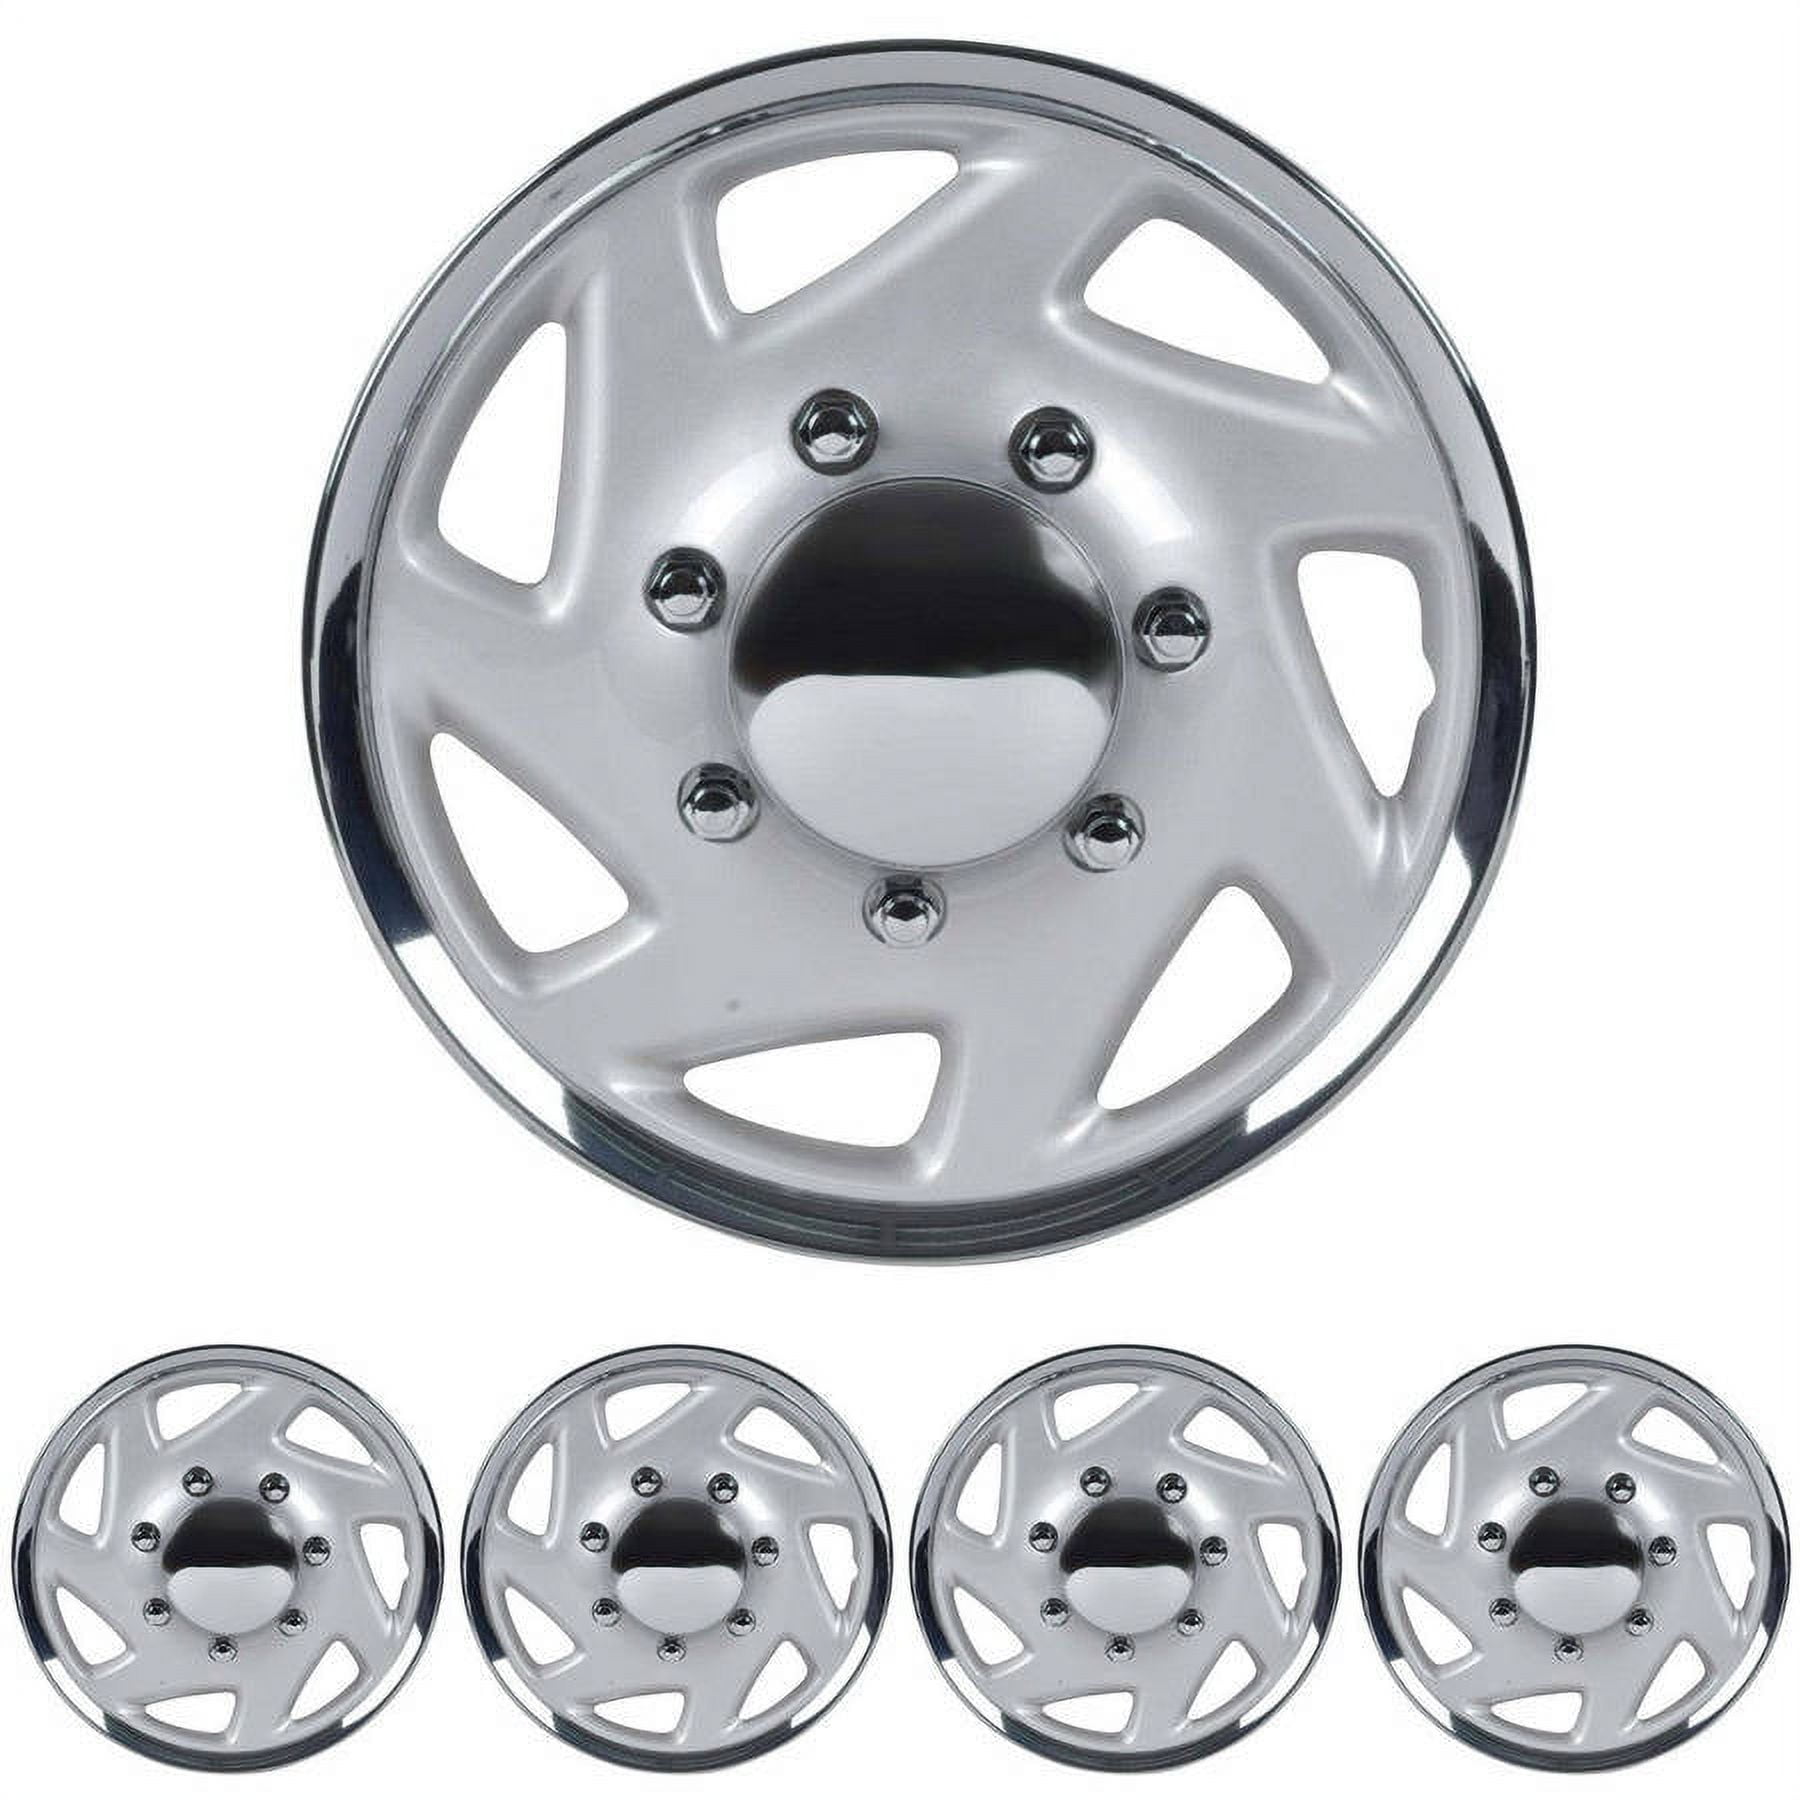 BDK Ford E-Series Style Hubcaps Wheel Cover, 16